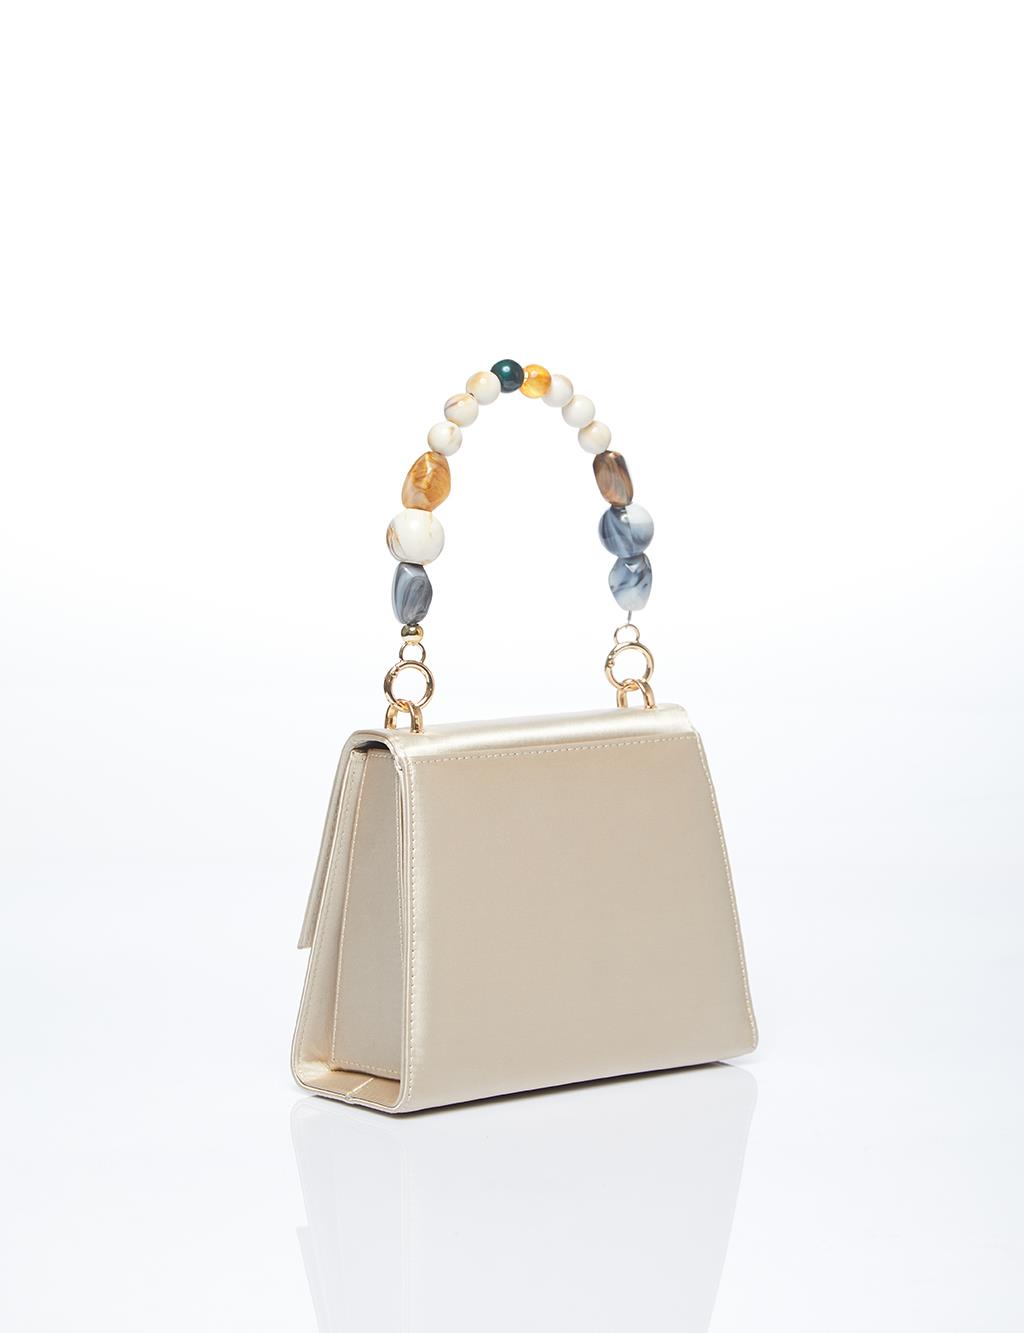 Beaded Cover Satin Bag Cream with Metal Accessories